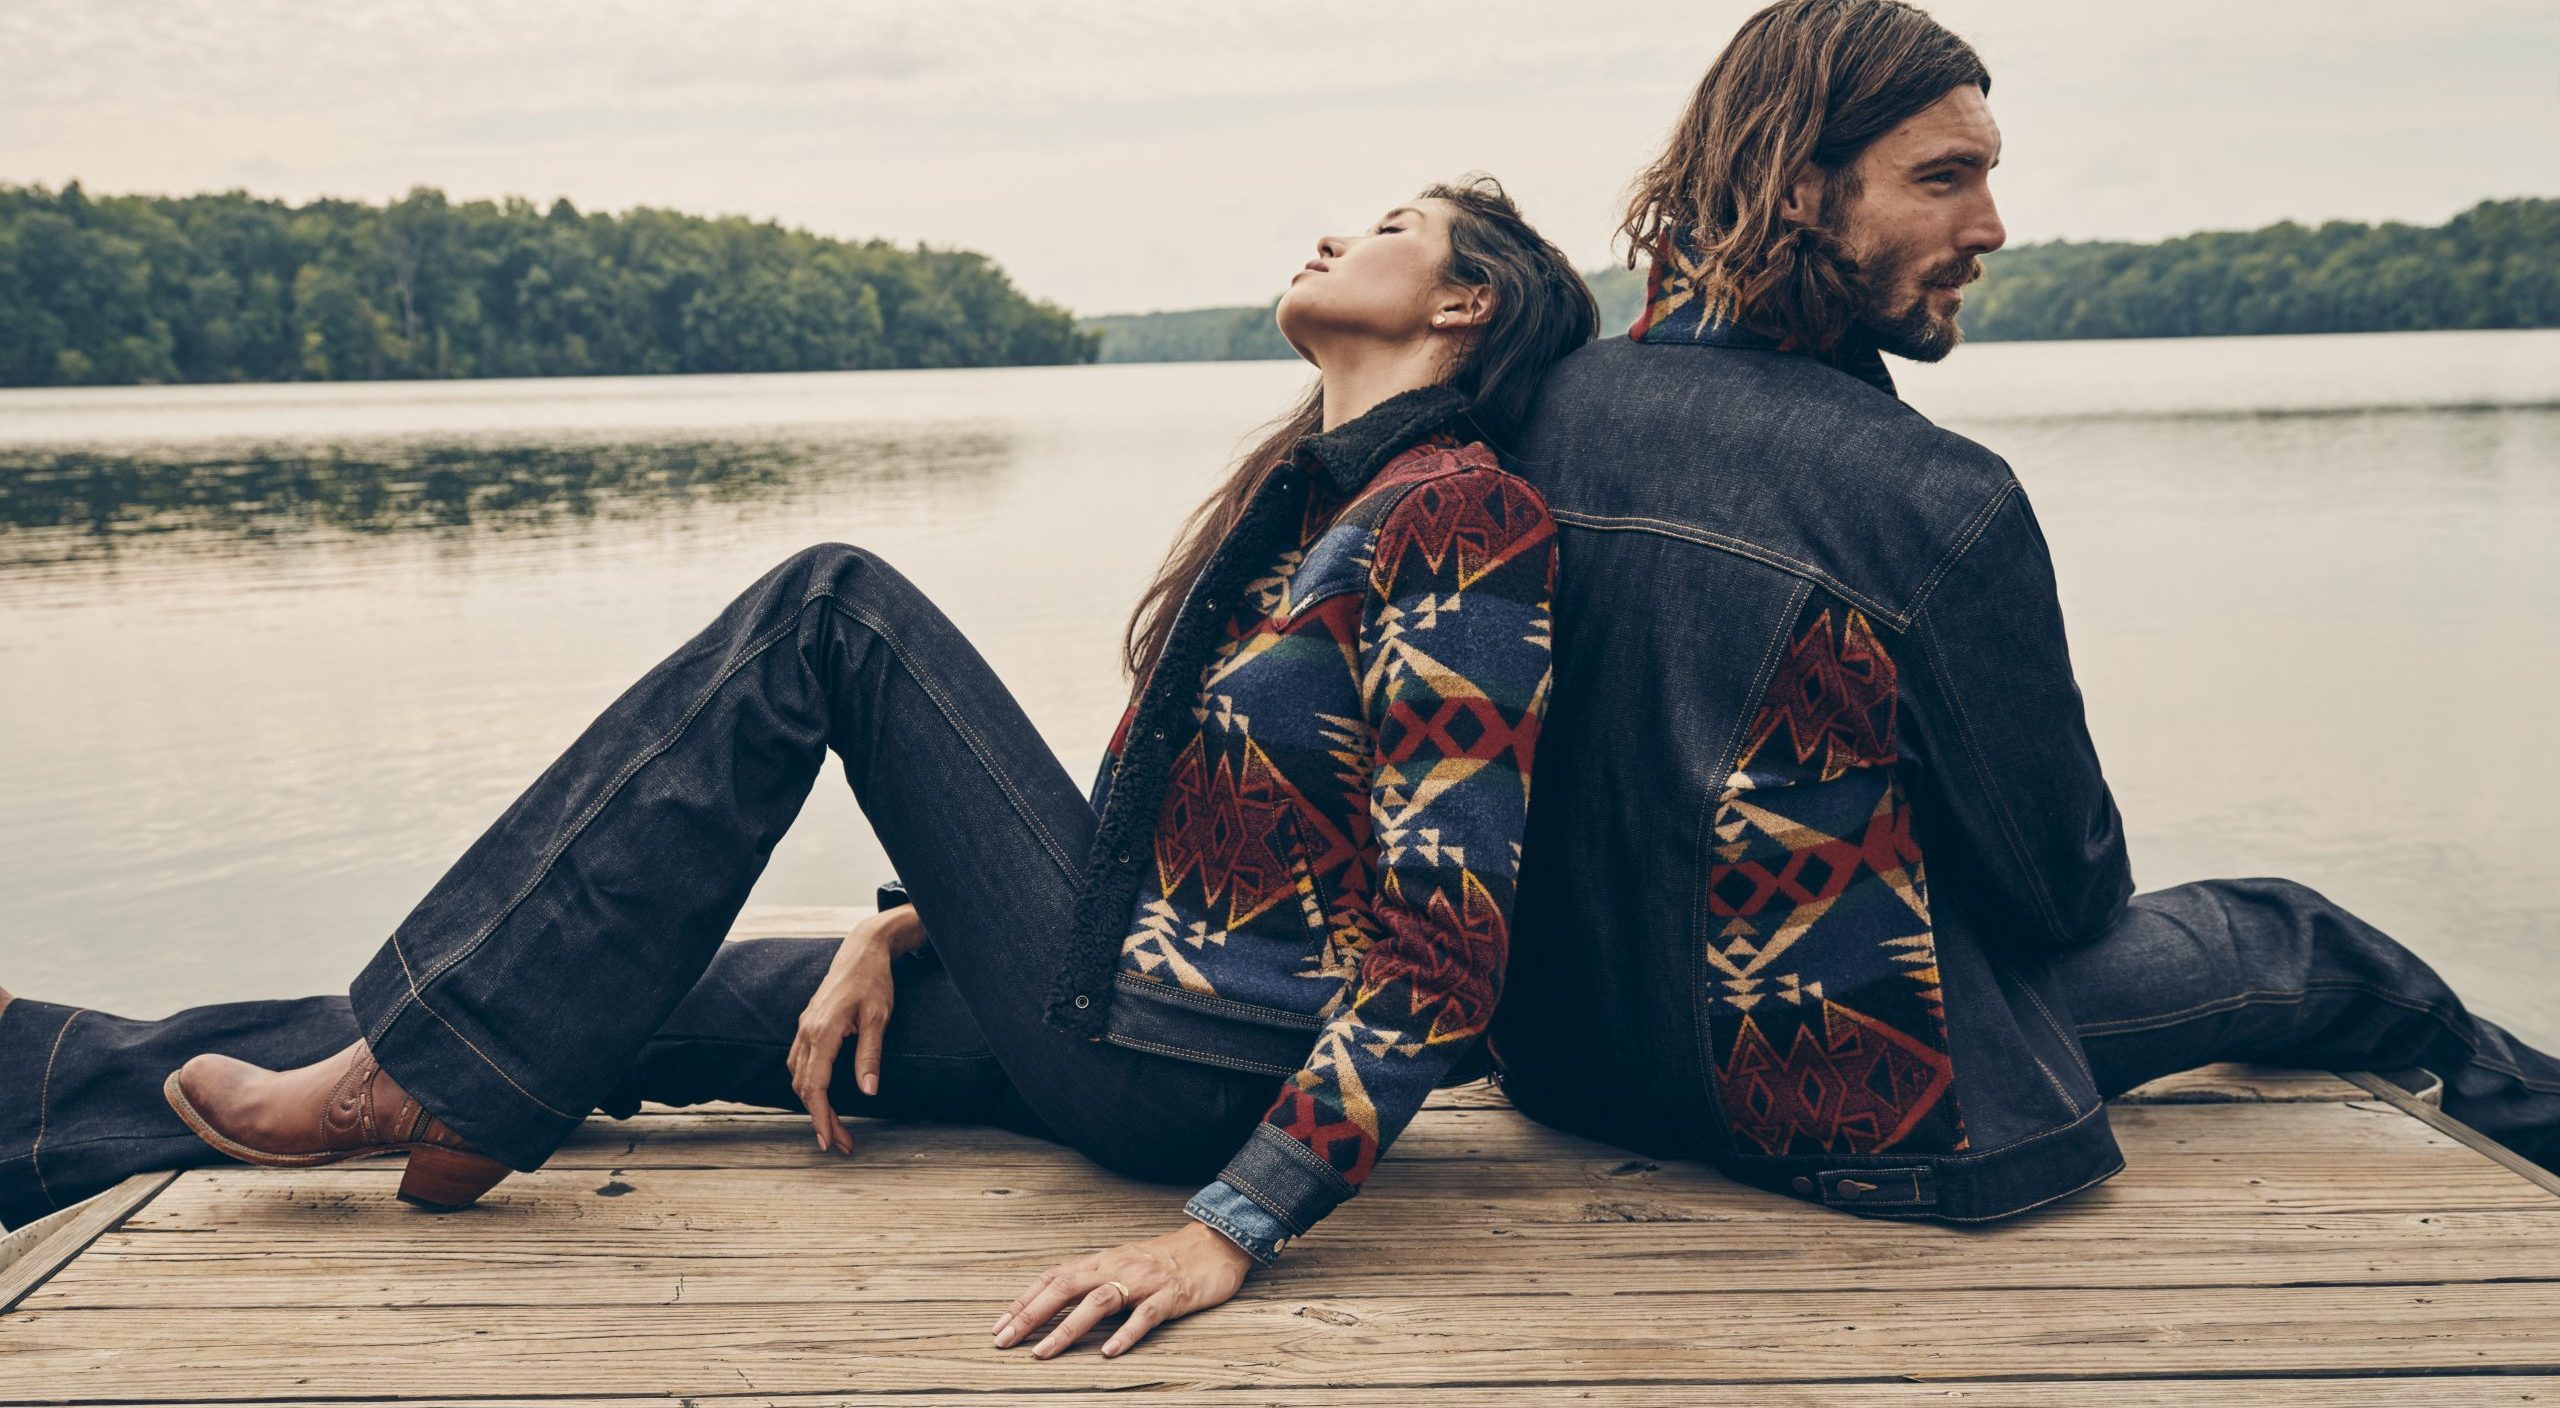 Weaving the Spirit of the West: The New Wrangler x Pendleton Collection